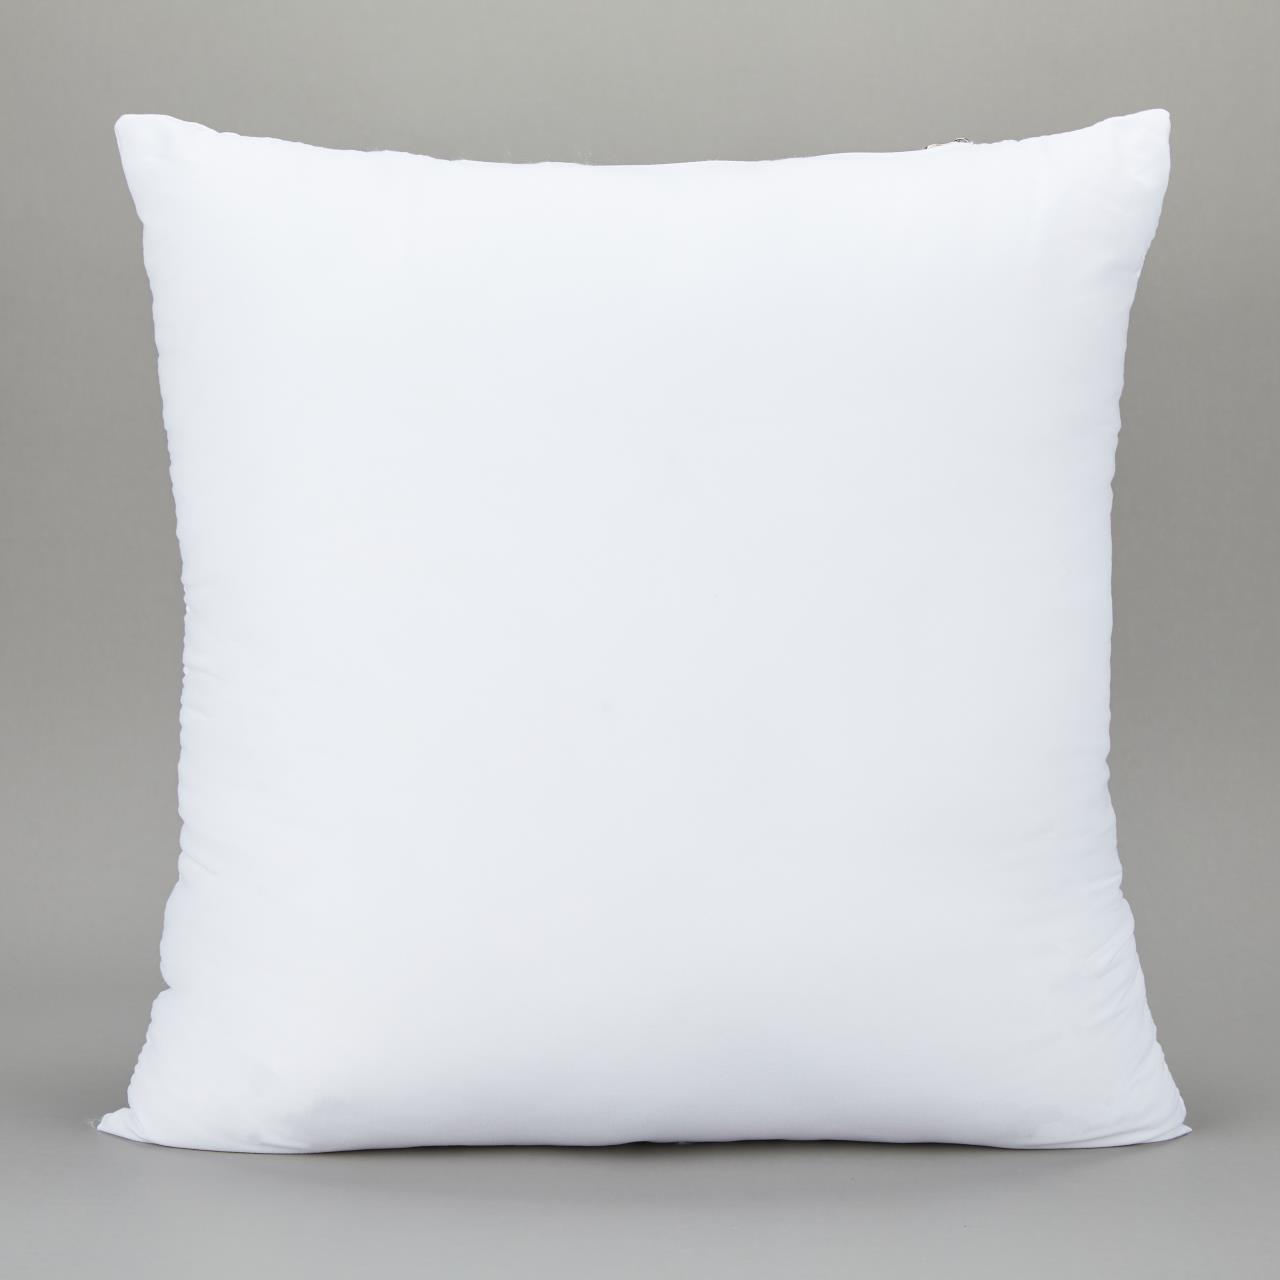 Pal Fabric Pillow Insert for 18x18 Sham or Decorative Pillow Cover, Square,  4 Piece-Palfabric